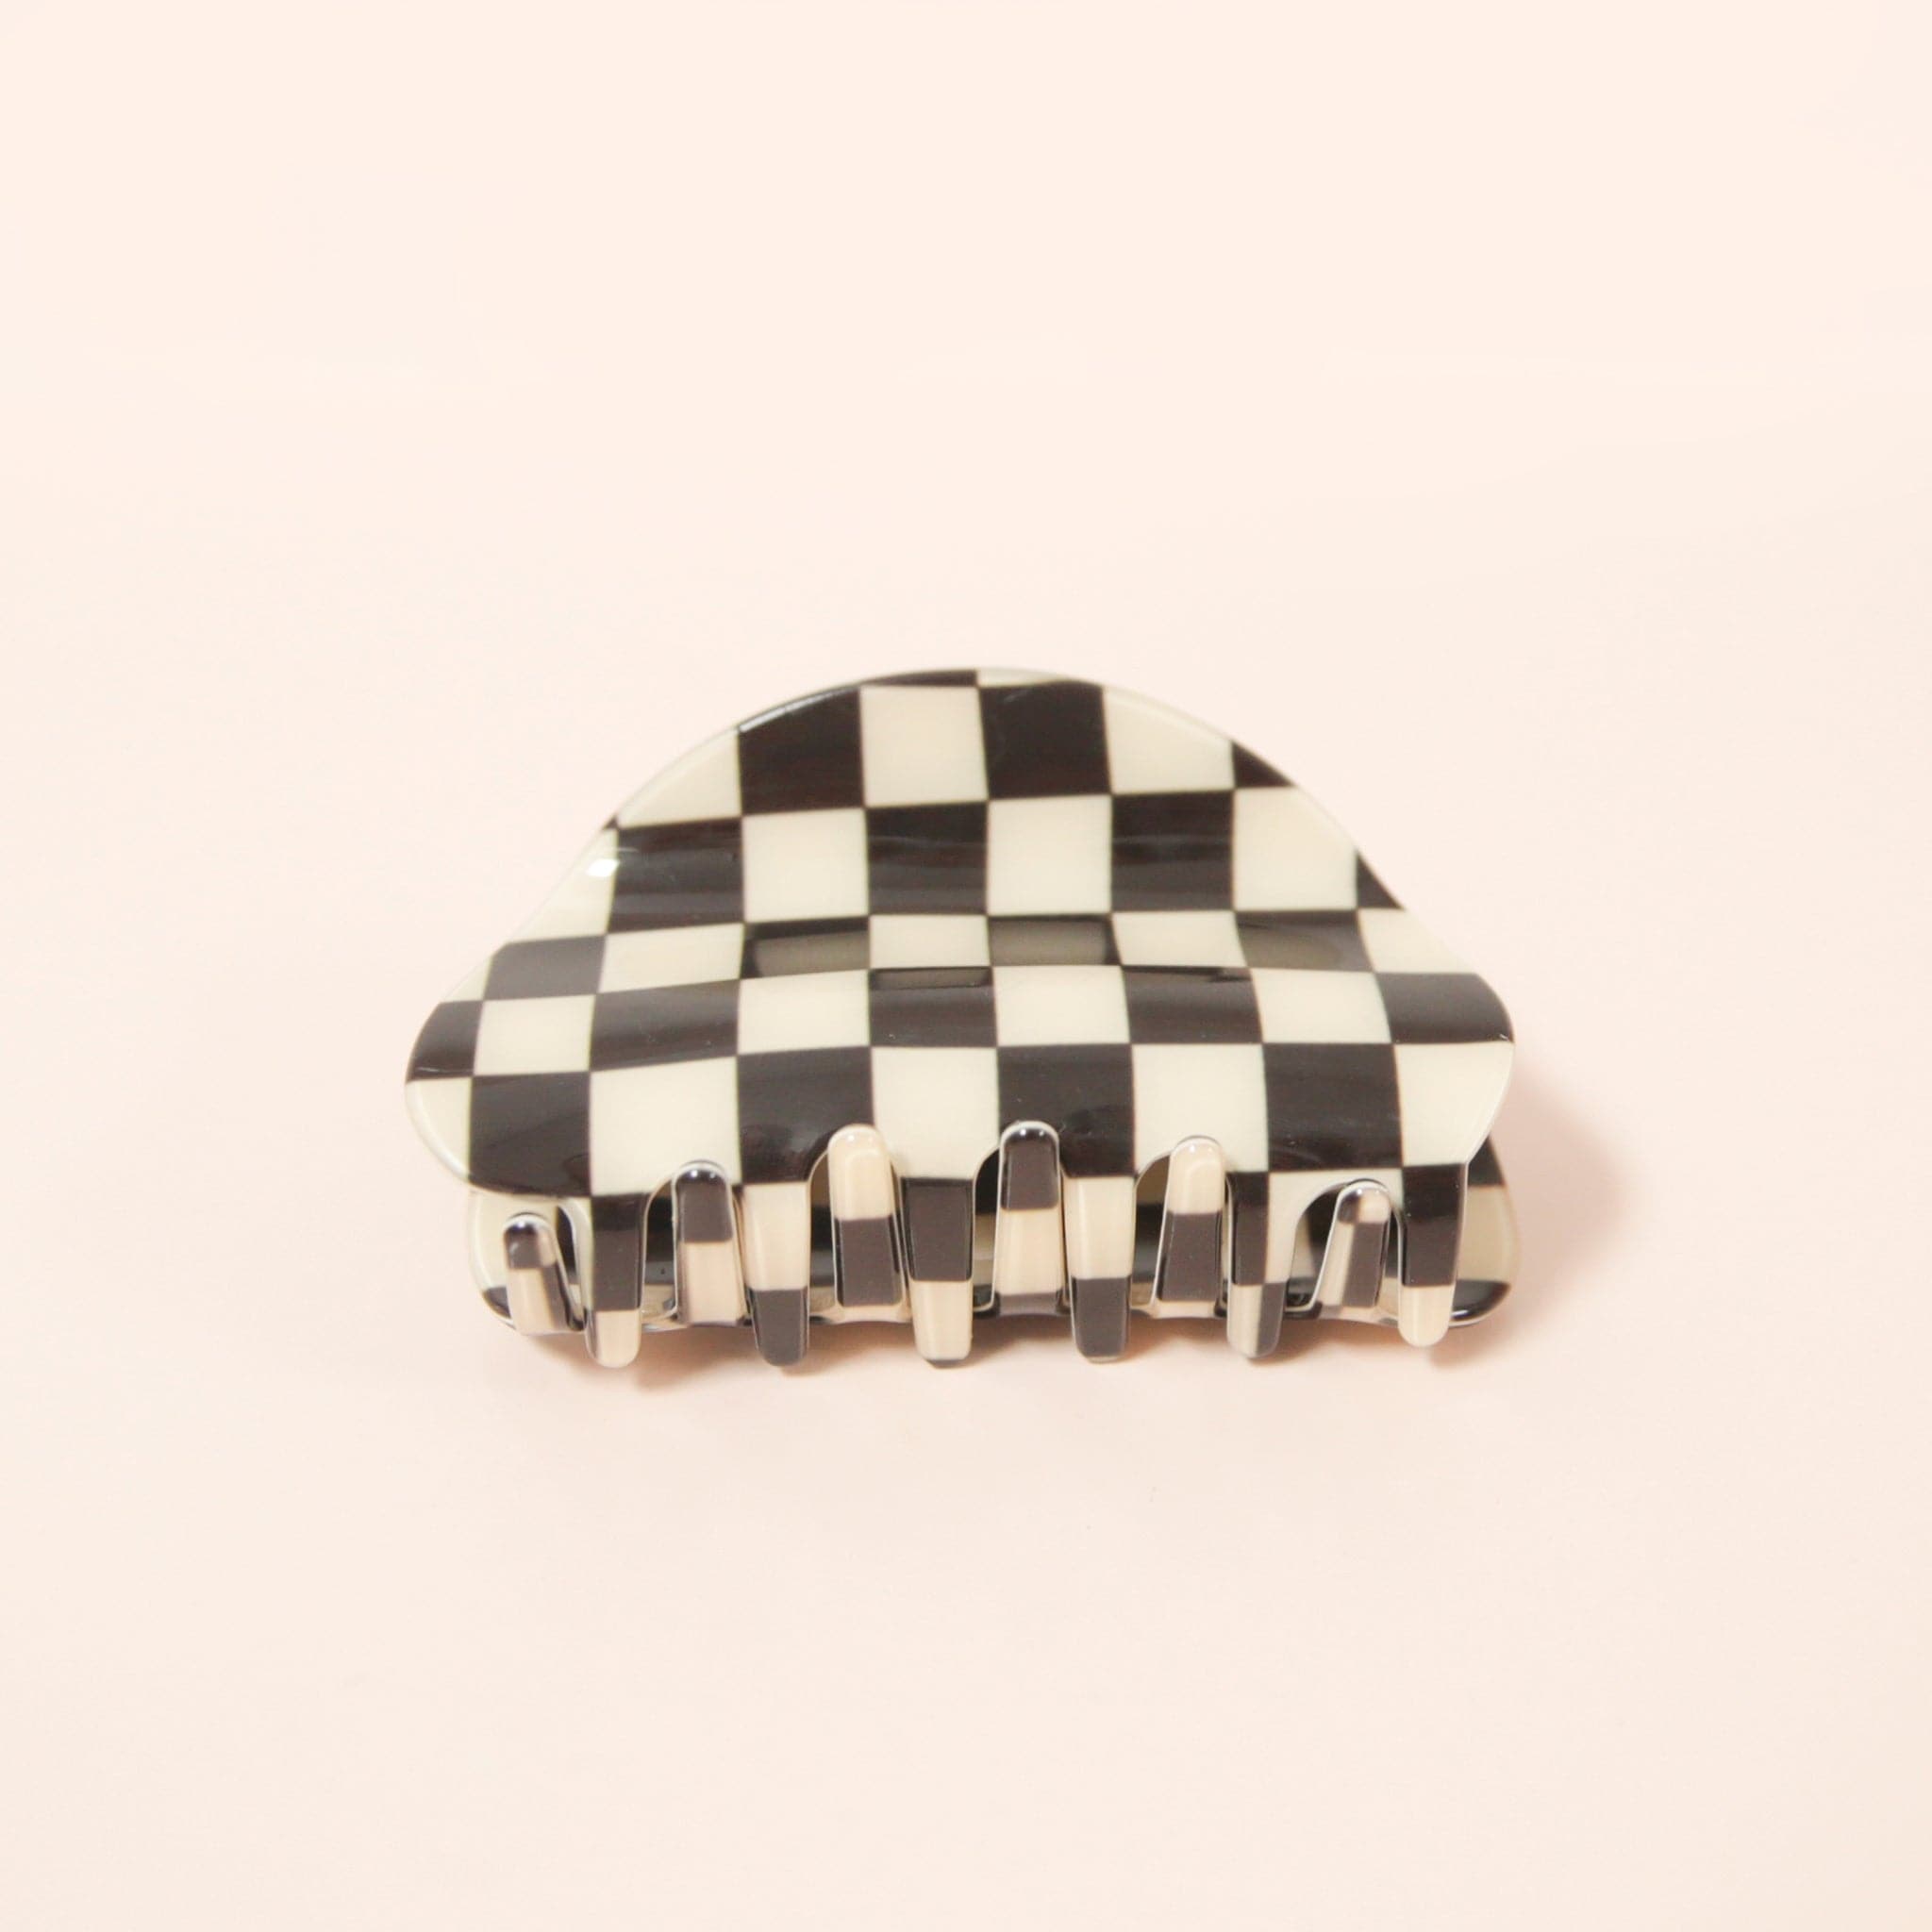 A black and white checkered claw clip with a rounded edge detail.